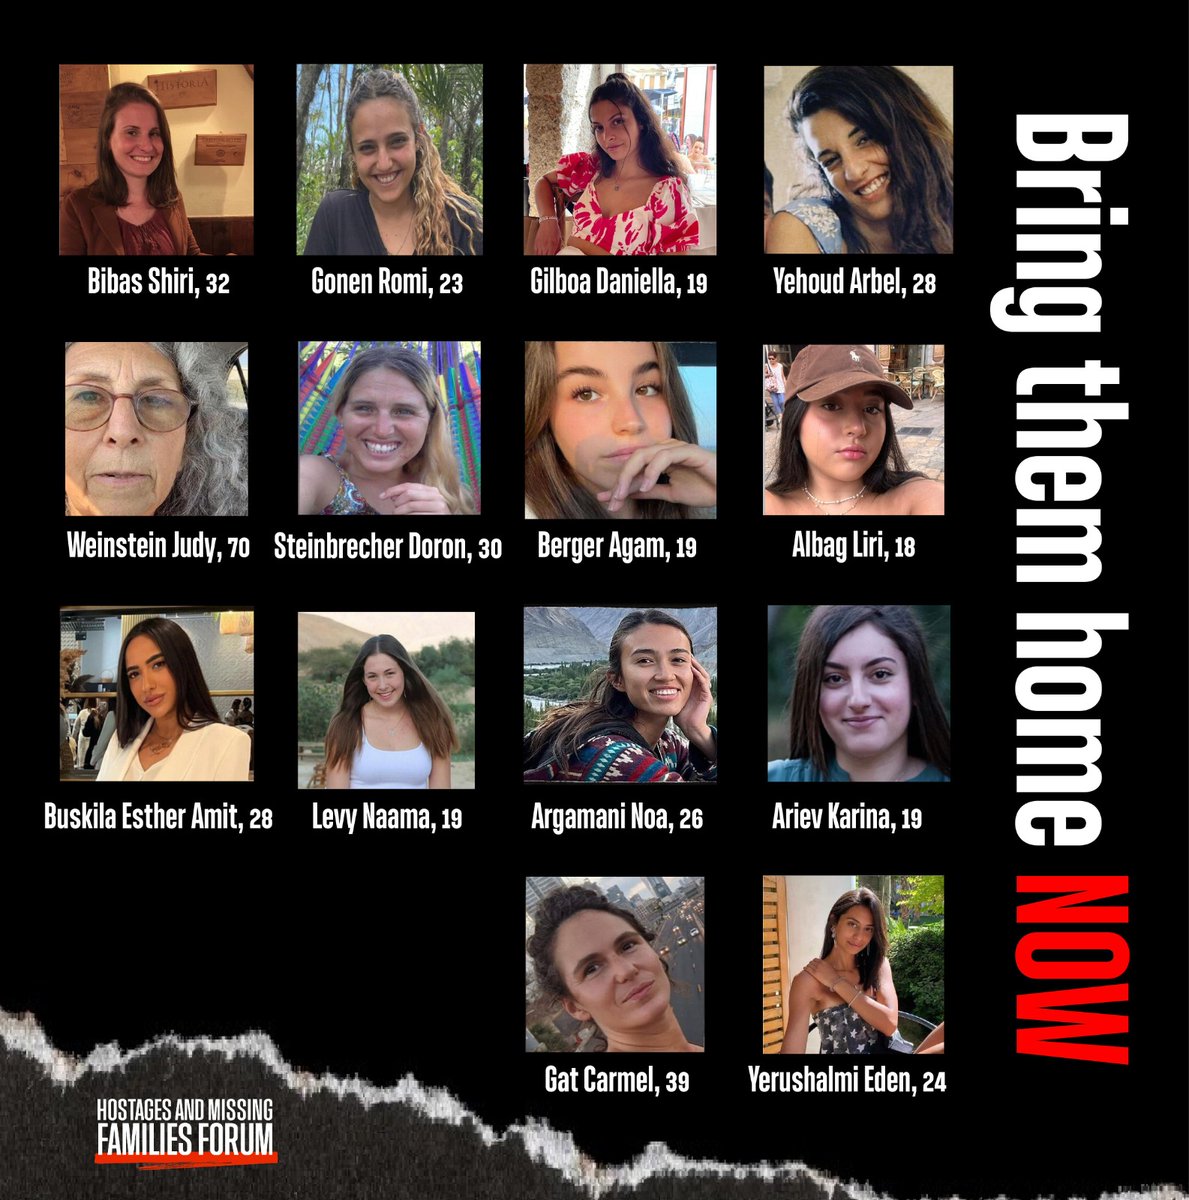 These women are spending #Passover in nightmarish captivity in Gaza. They are enduring unspeakable tortures, day after day. On this holiday of freedom, demand the release of the hostages. #BringThemHomeNow #LetMyPeopleGo